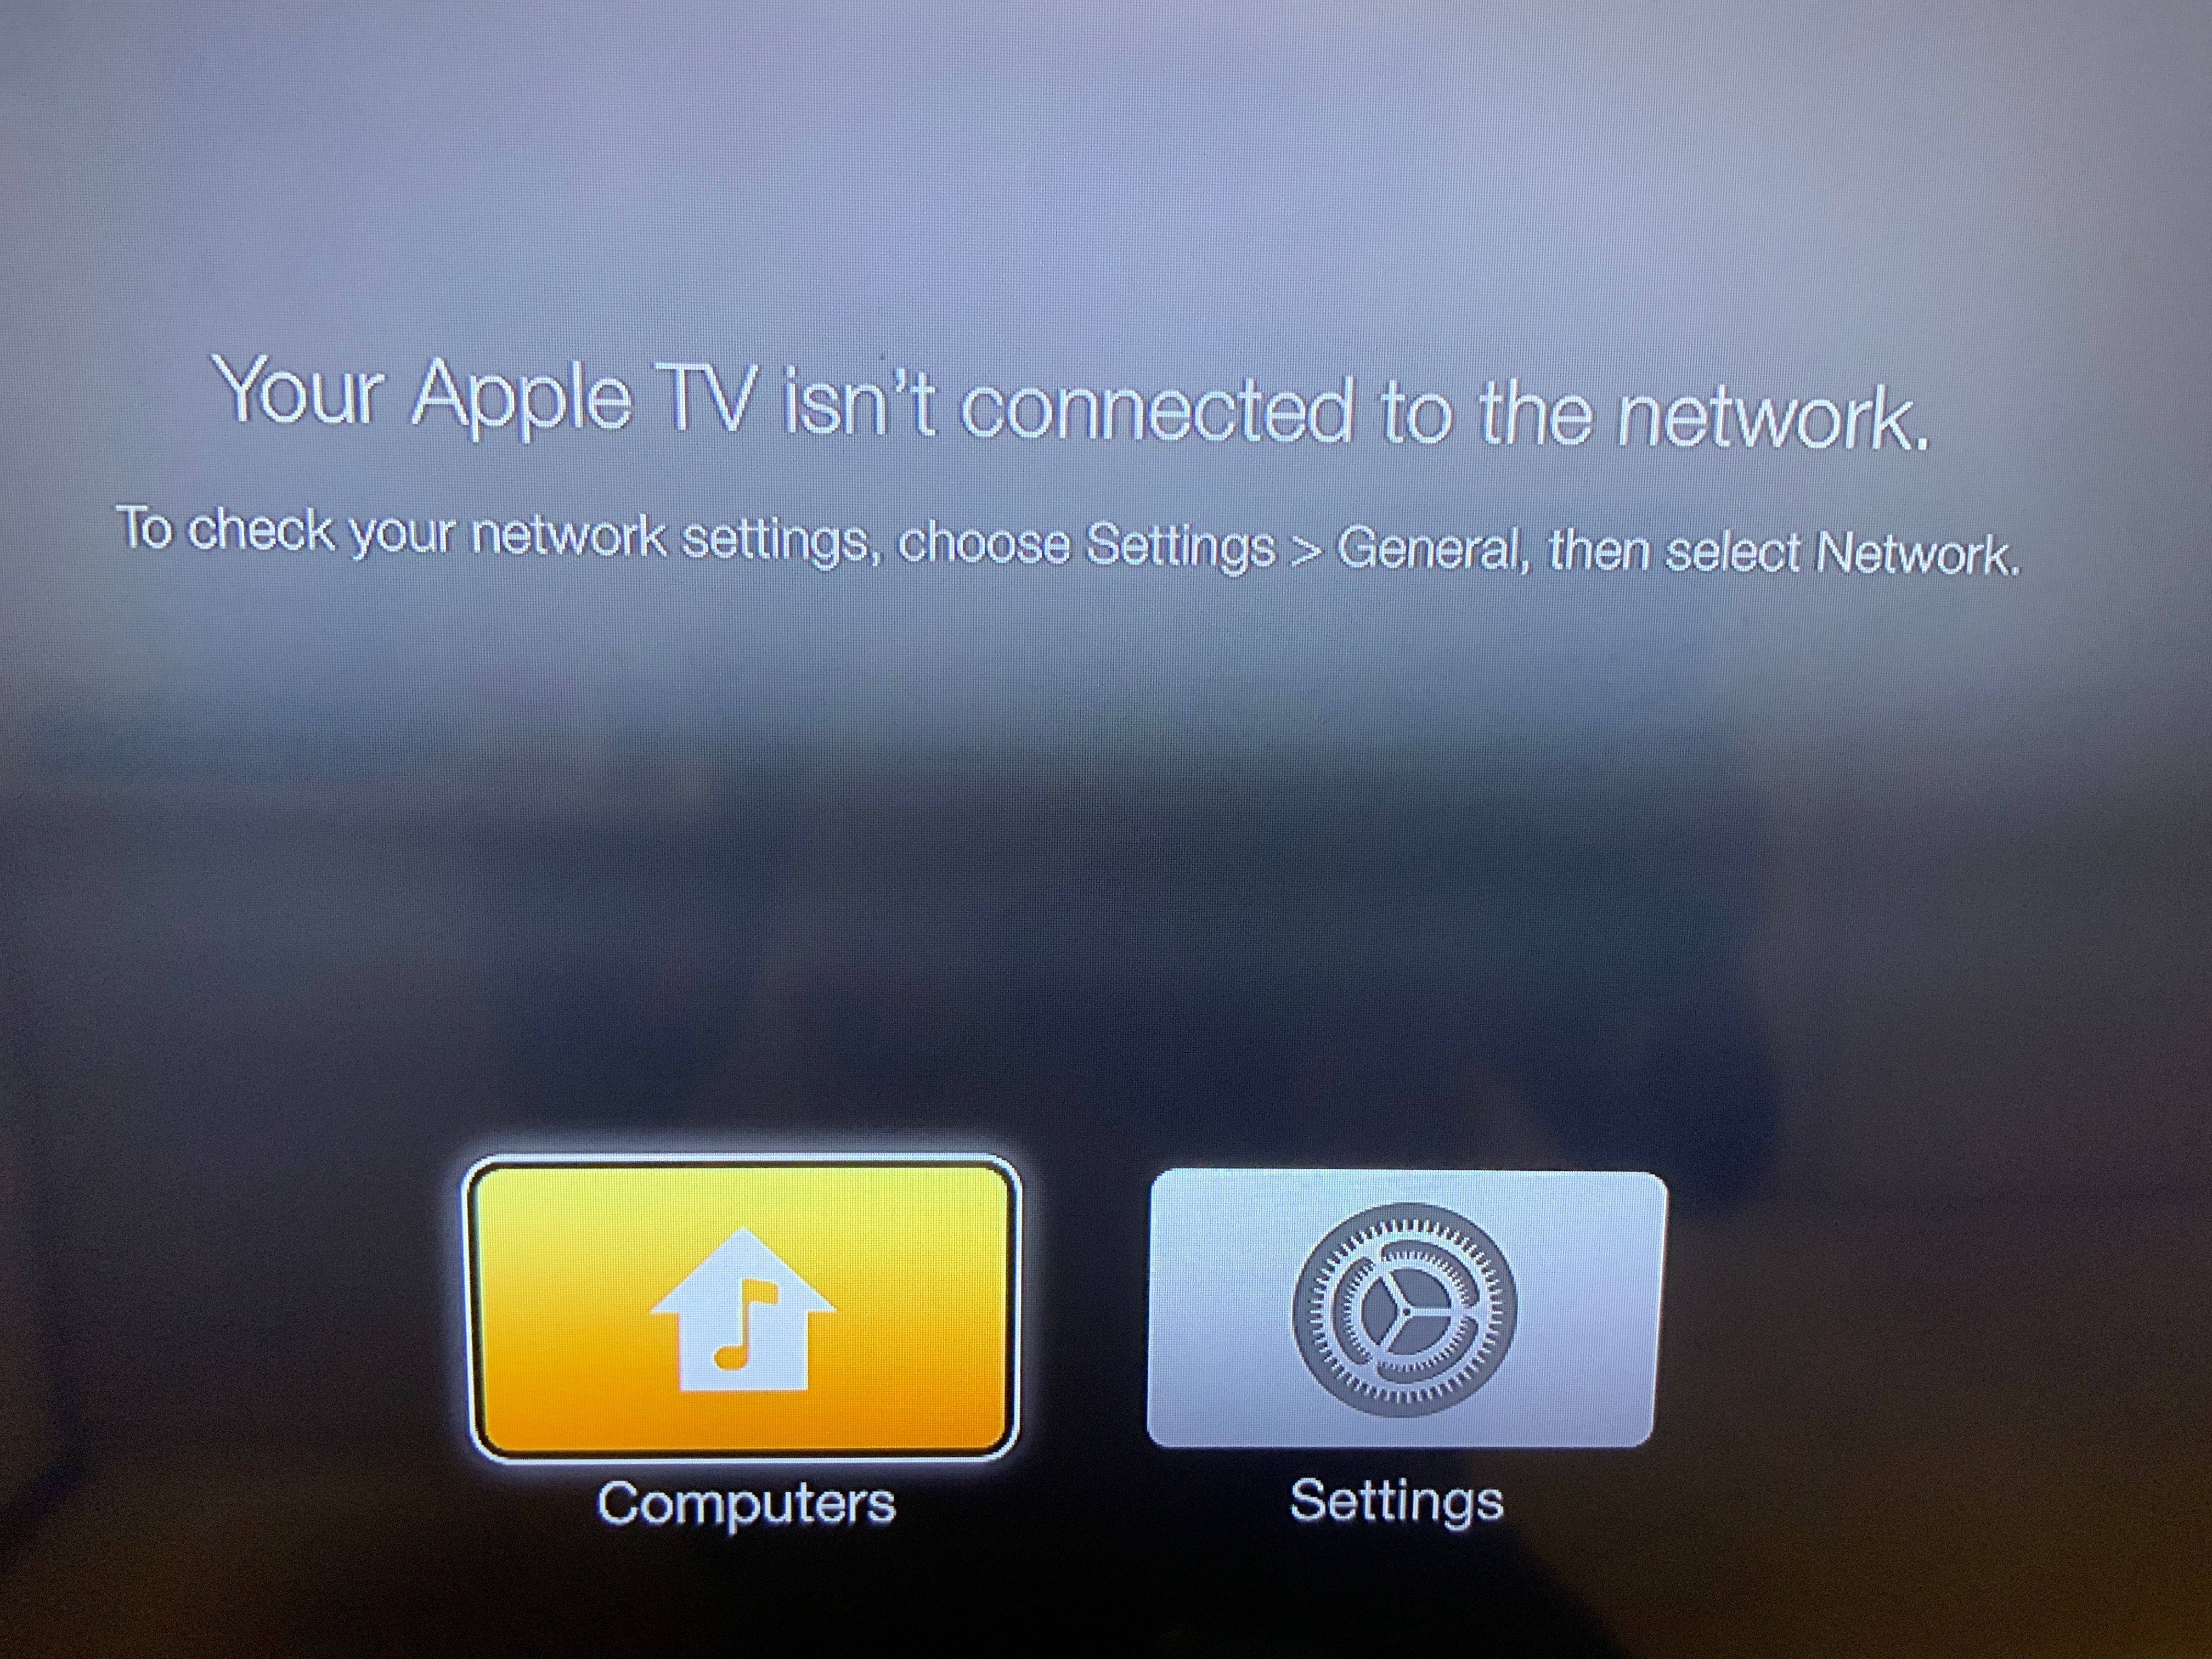 Apple TV 3 gen is stuck on the “Your A… - Apple Community